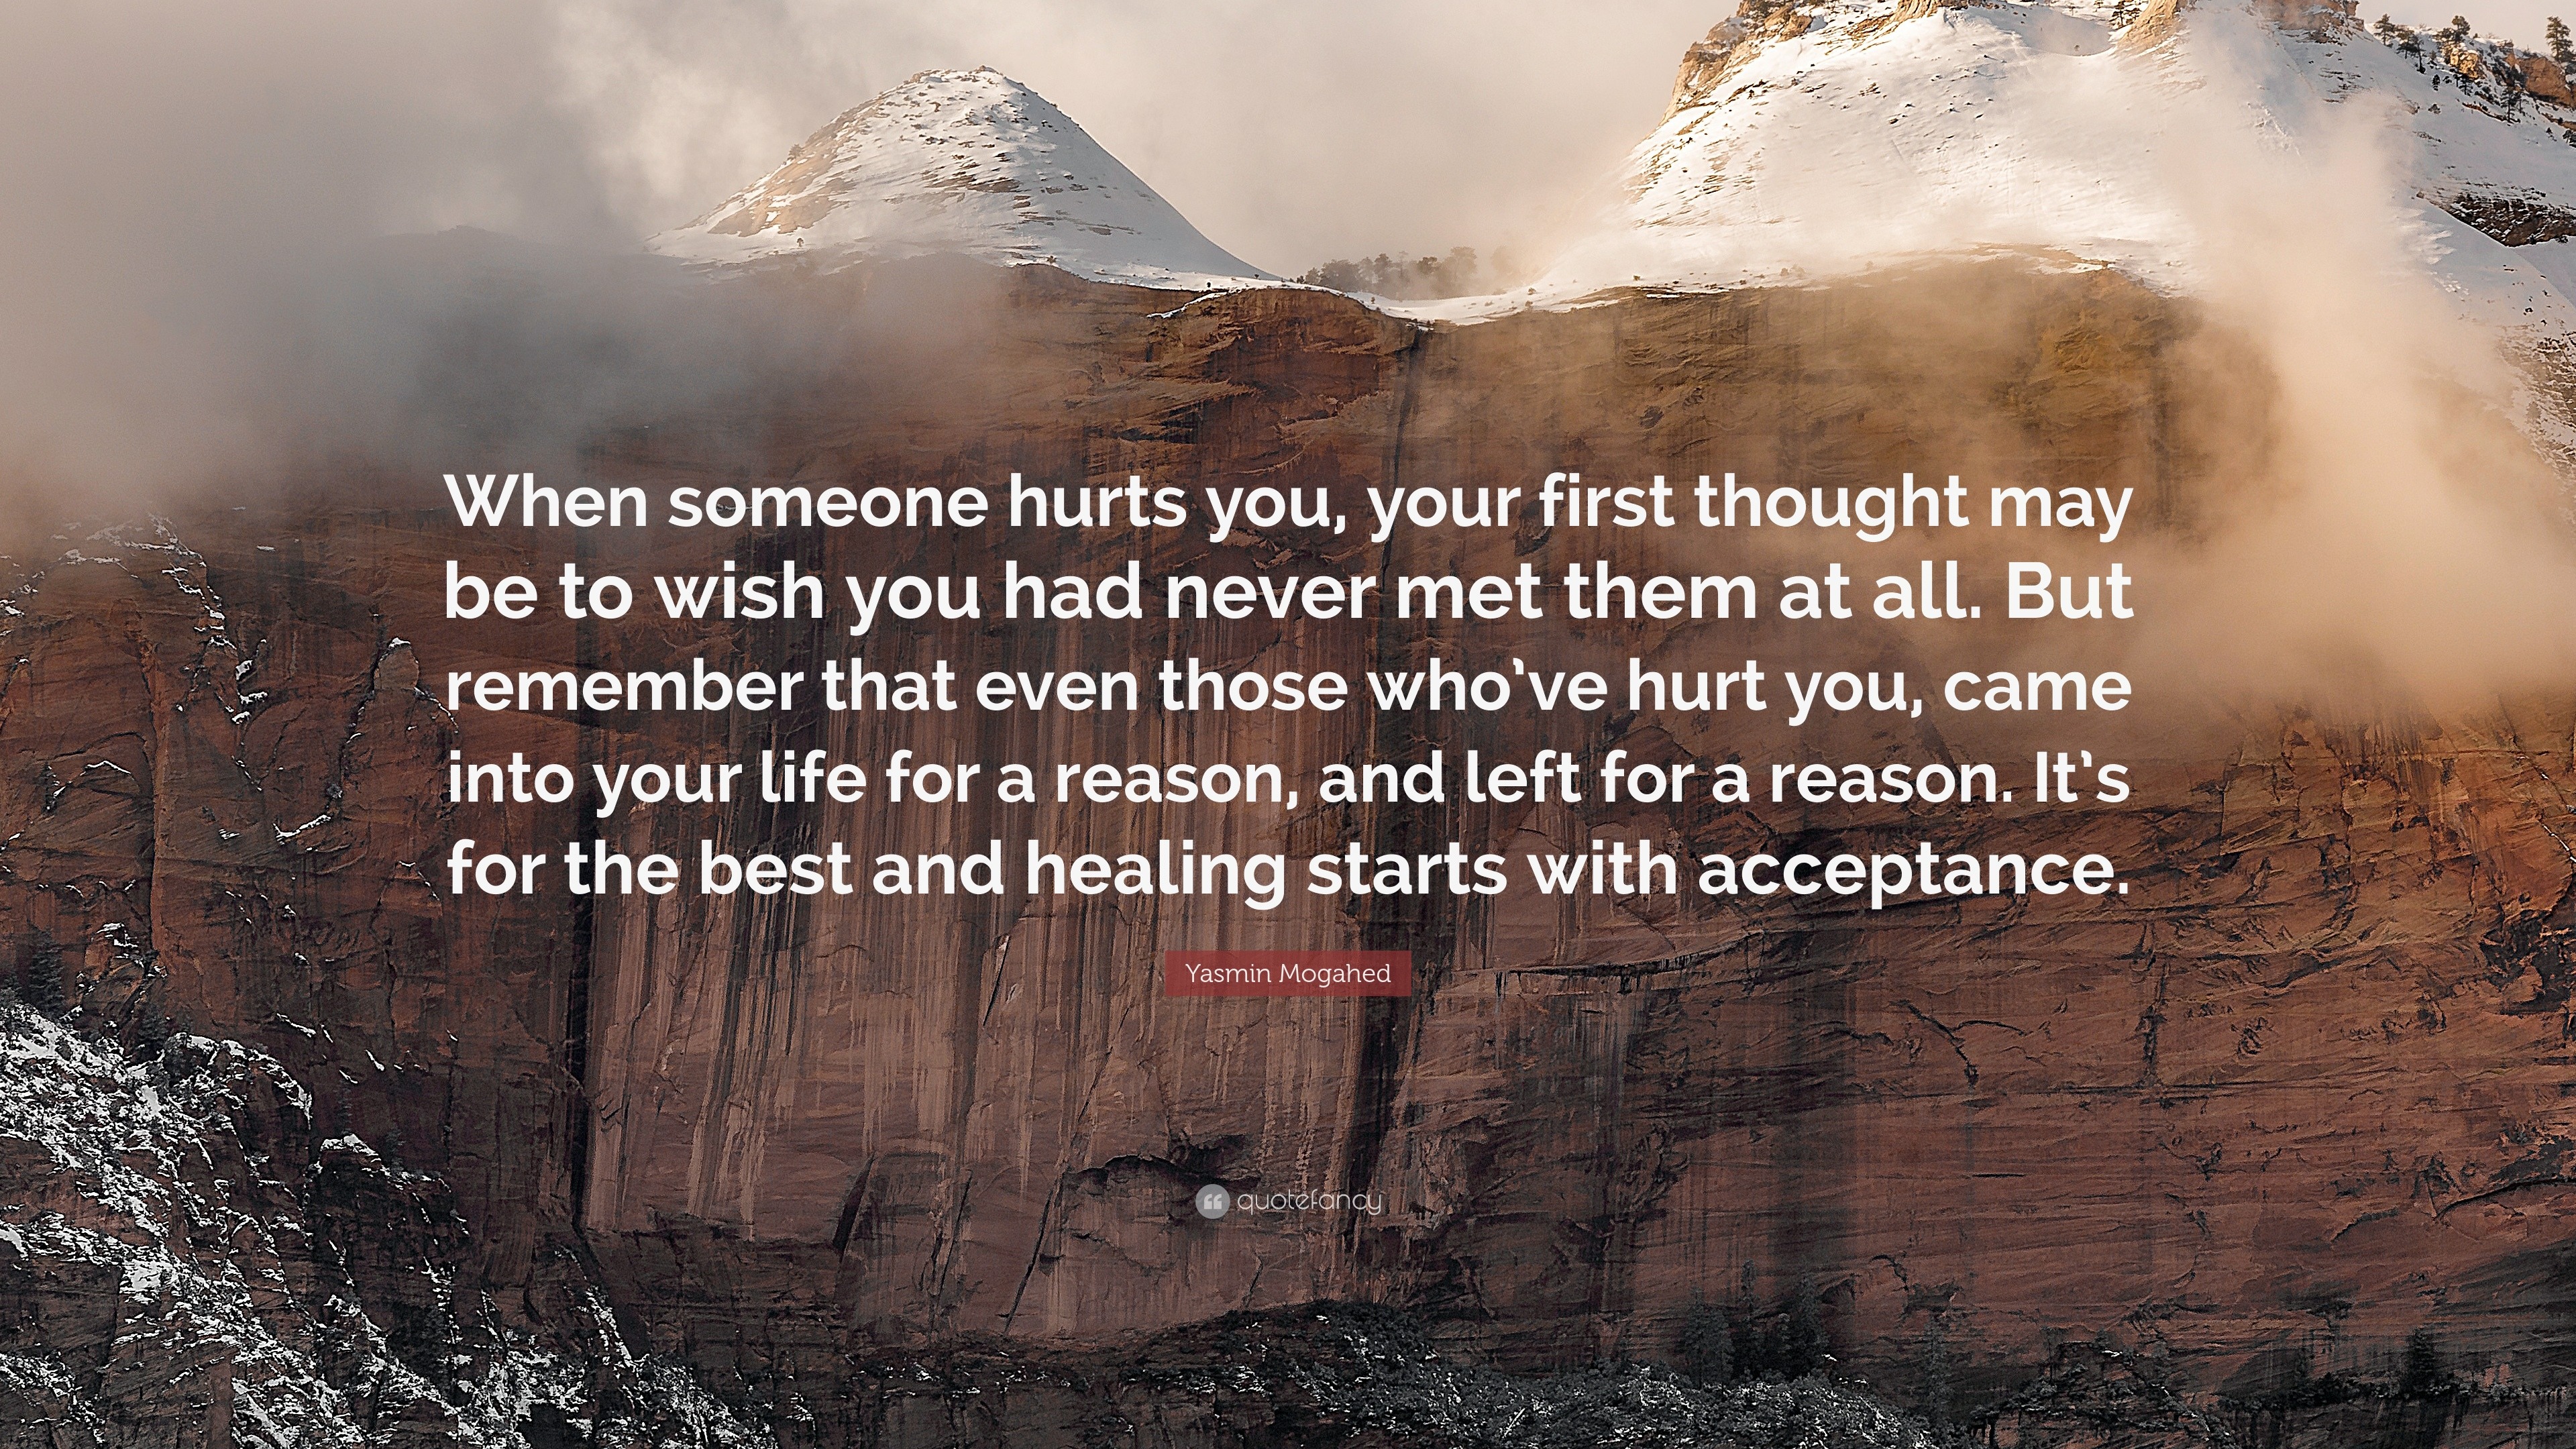 Yasmin Mogahed Quote “When someone hurts you your first thought may be to